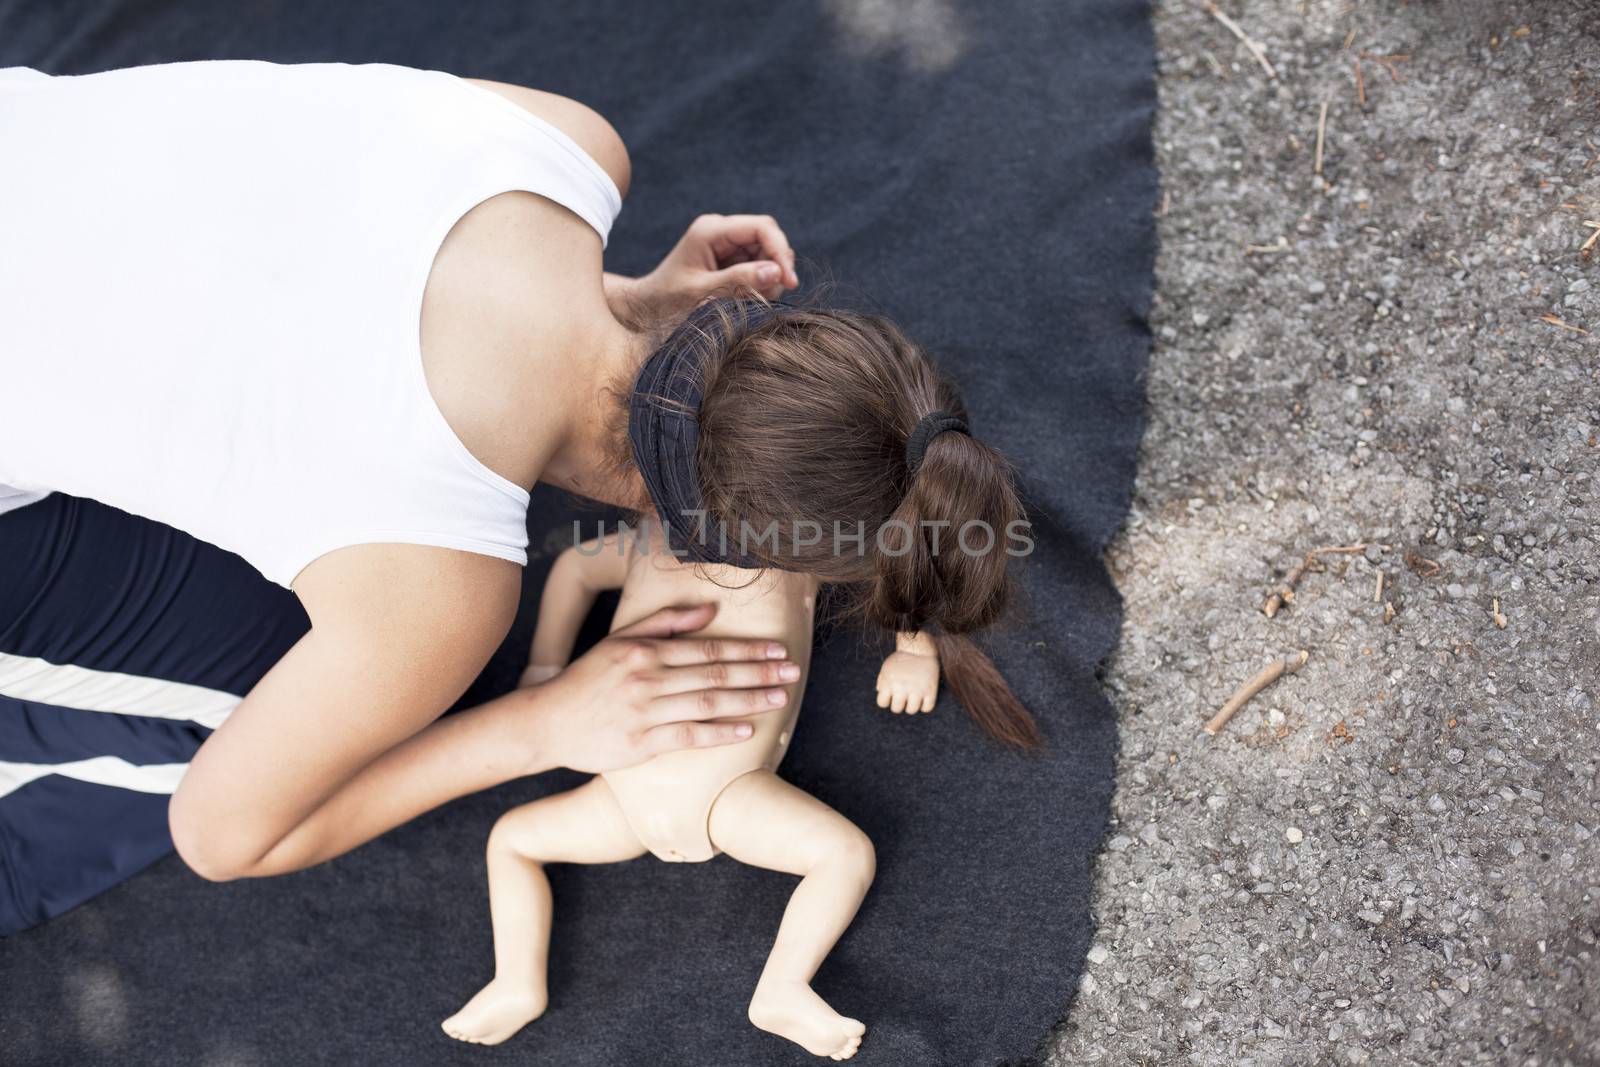 Infant dummy first aid by wellphoto